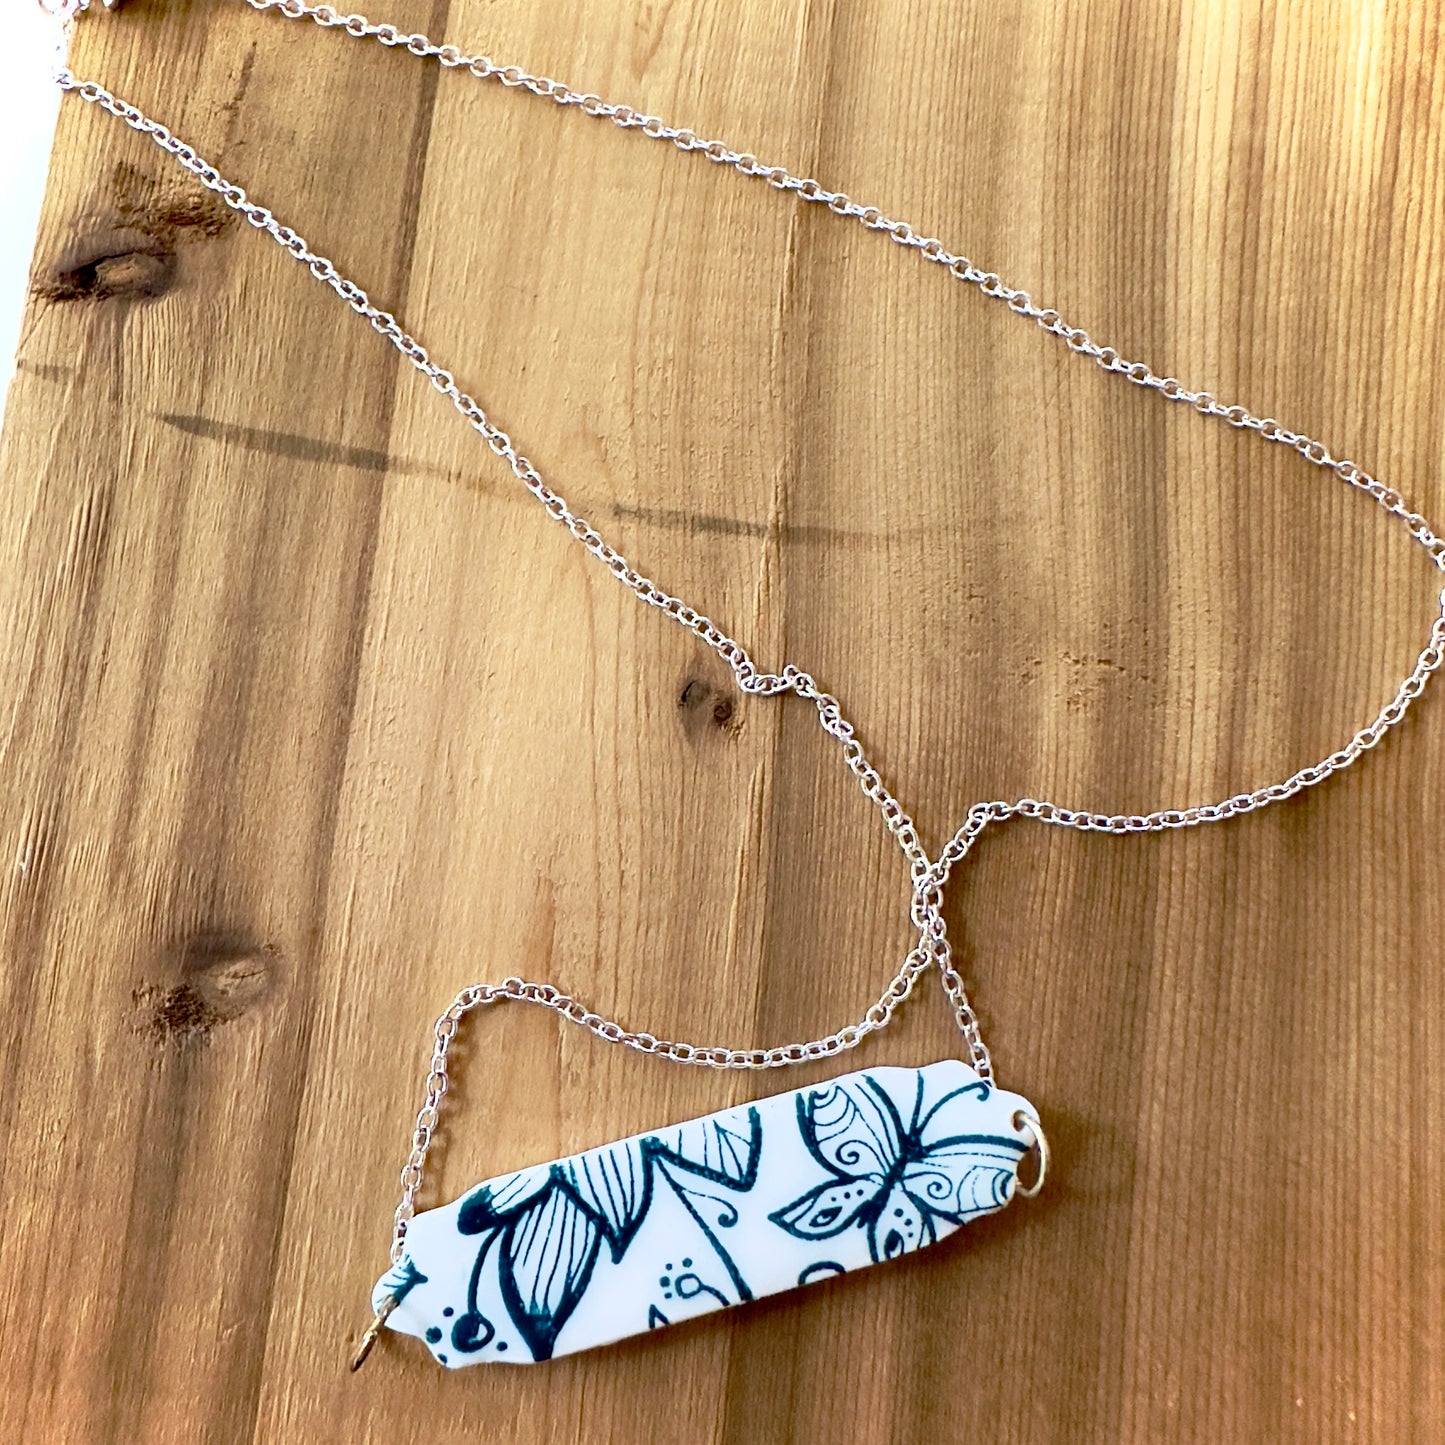 White and Teal Butterfly Screen Print Bar Bracelet or Necklace| Silver Hardware